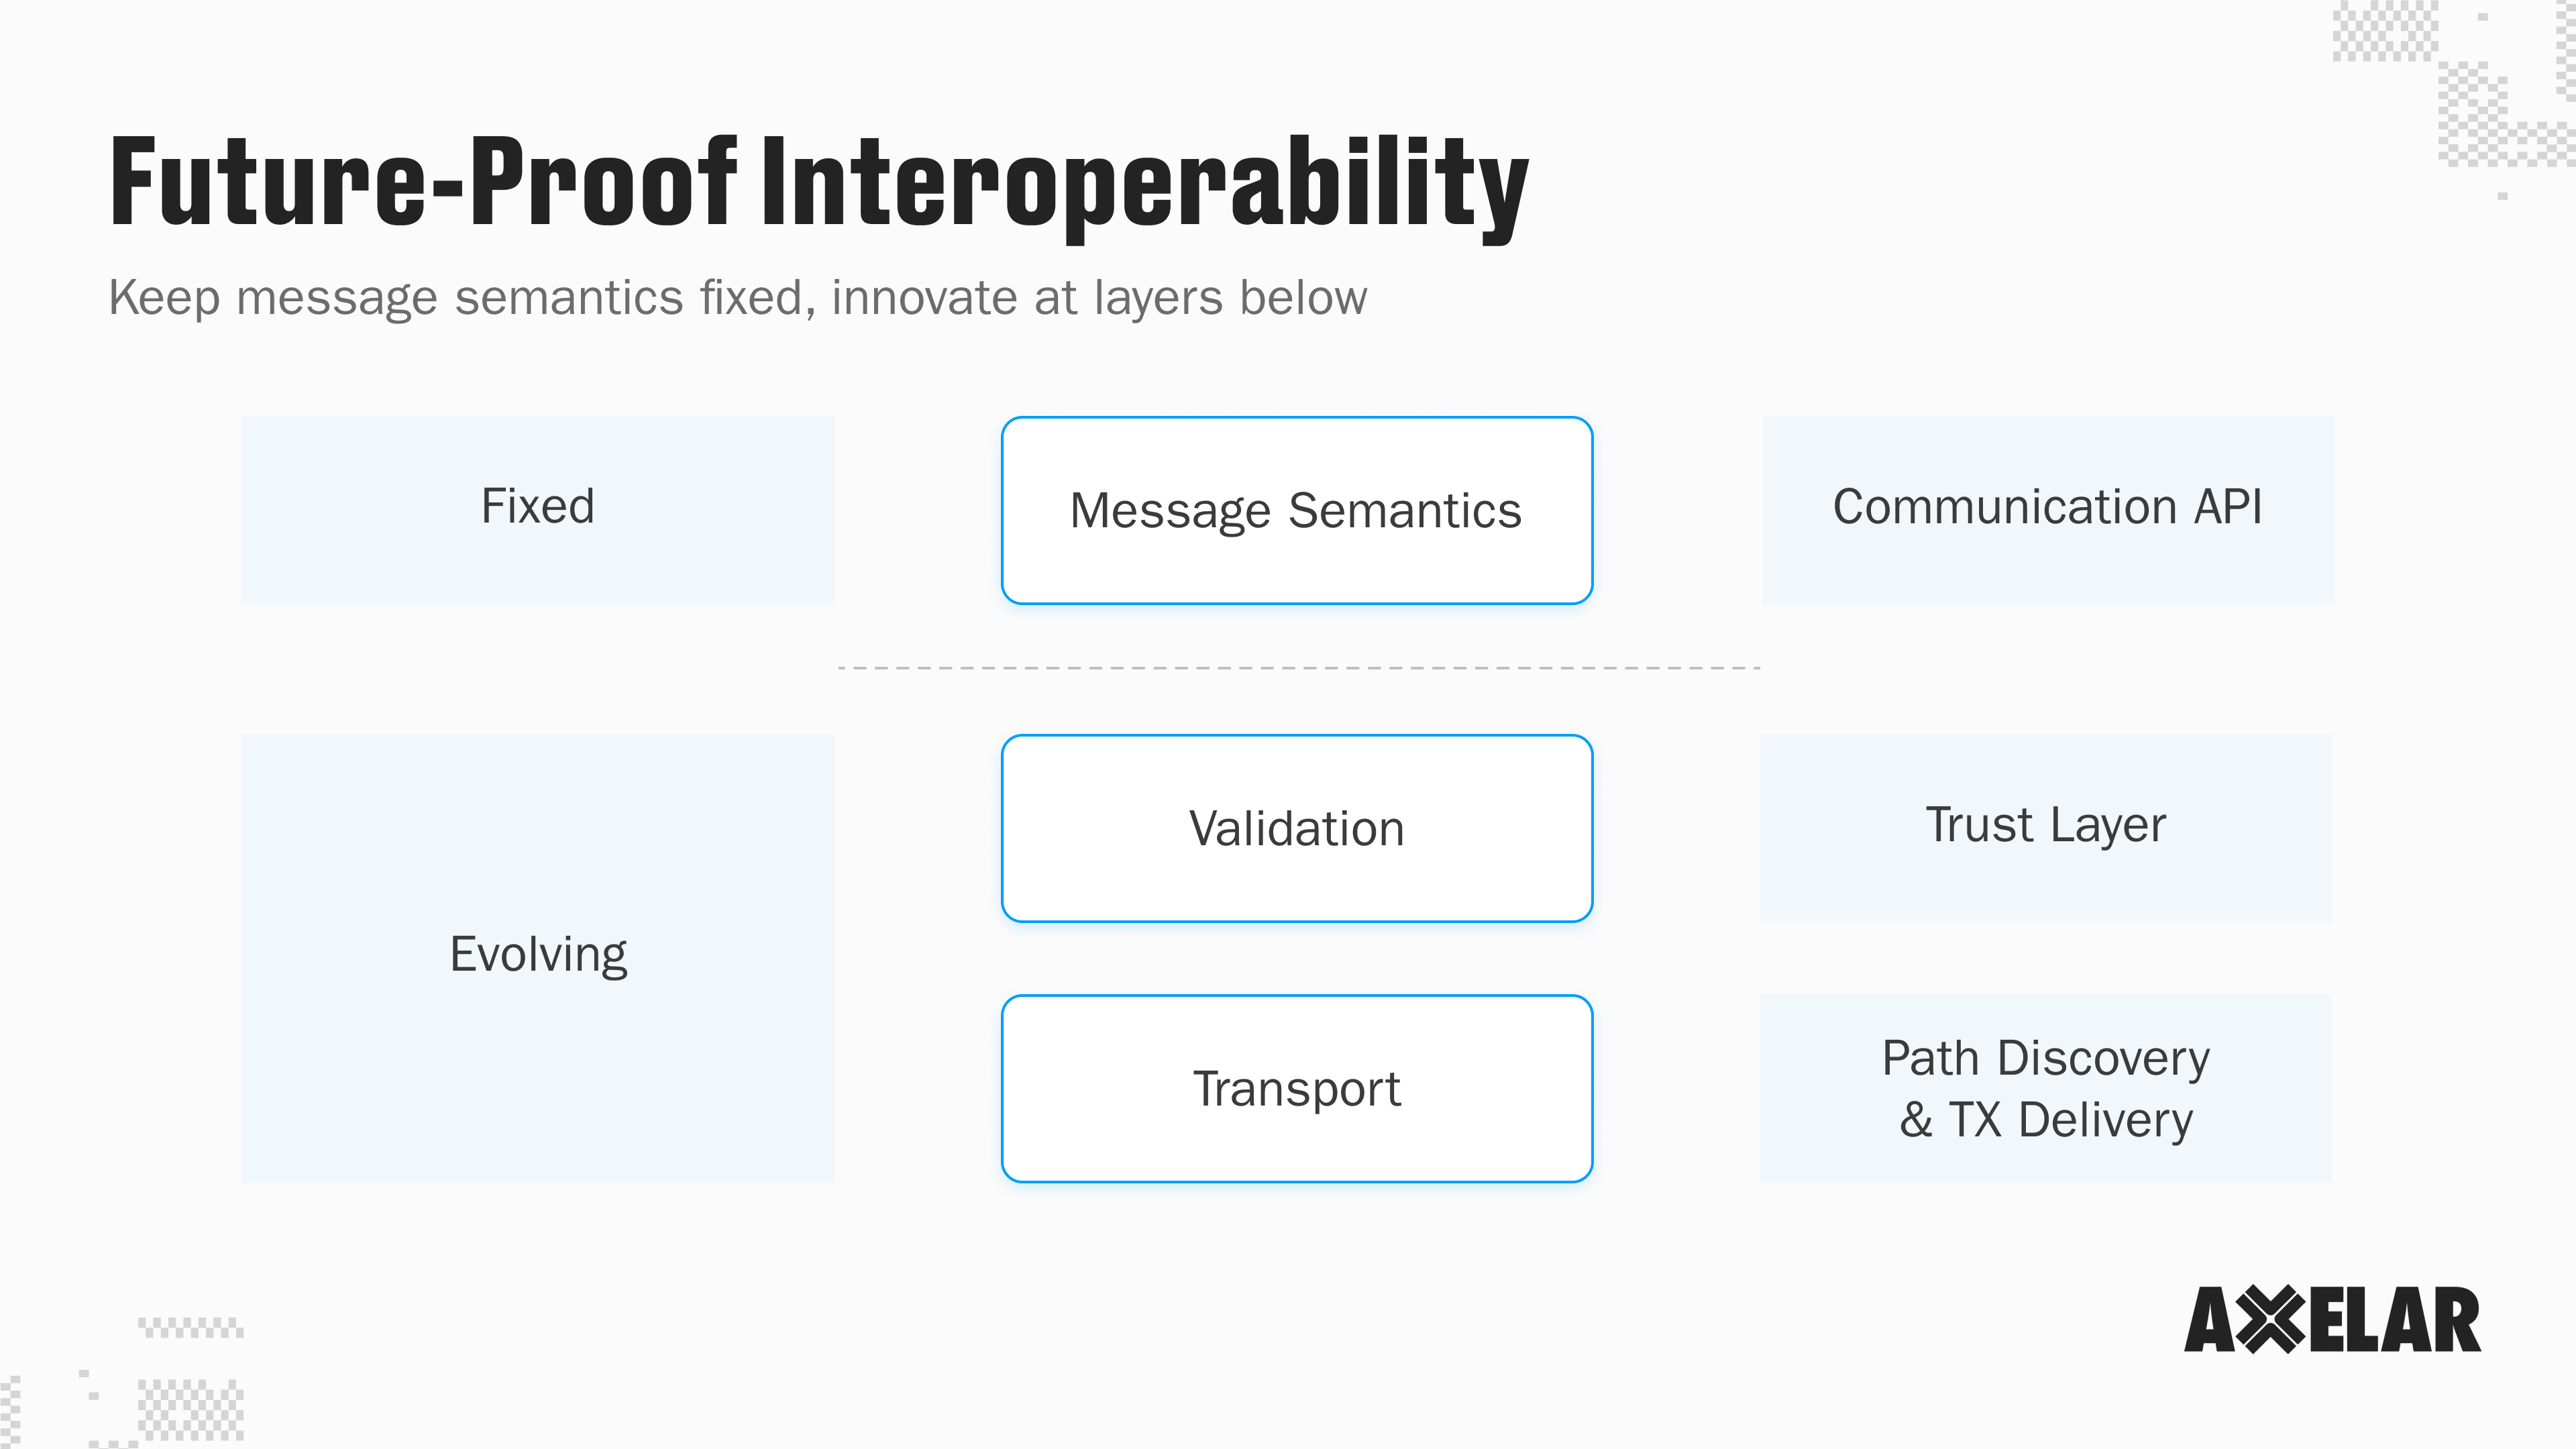 Diagram illustrating how decoupling the layers of message semantics, validation and transport in blockchain interoperability can deliver future-proof interoperability, in which security is customized or adapted easily to new technologies, without changes to application logic. 